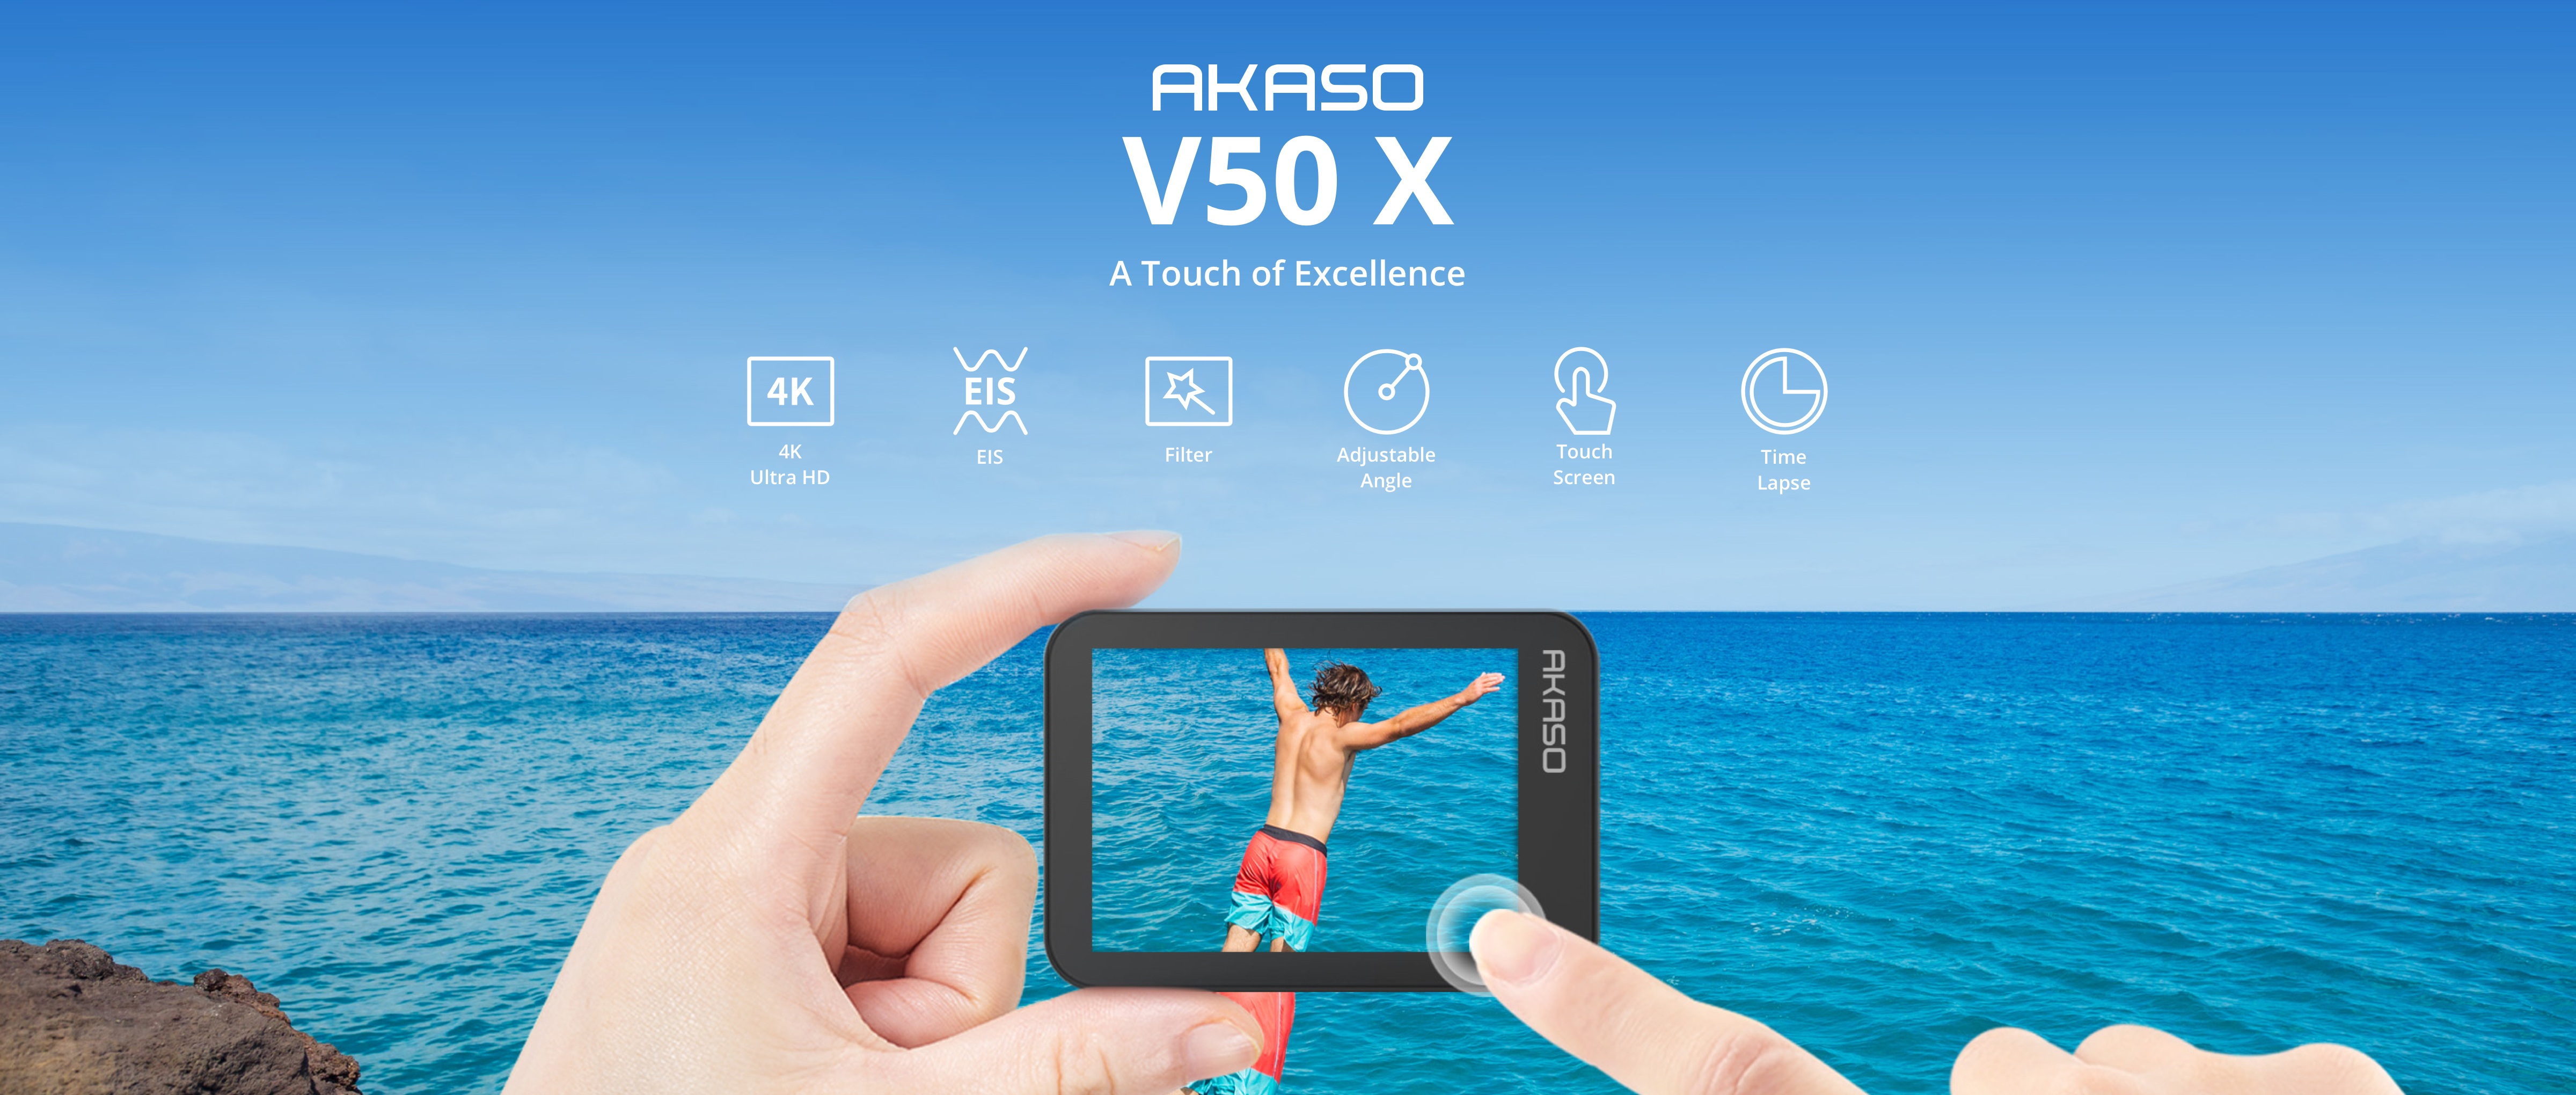 AKASO V50X Native 4K30fps WiFi Action Camera EIS Touch Screen 4X